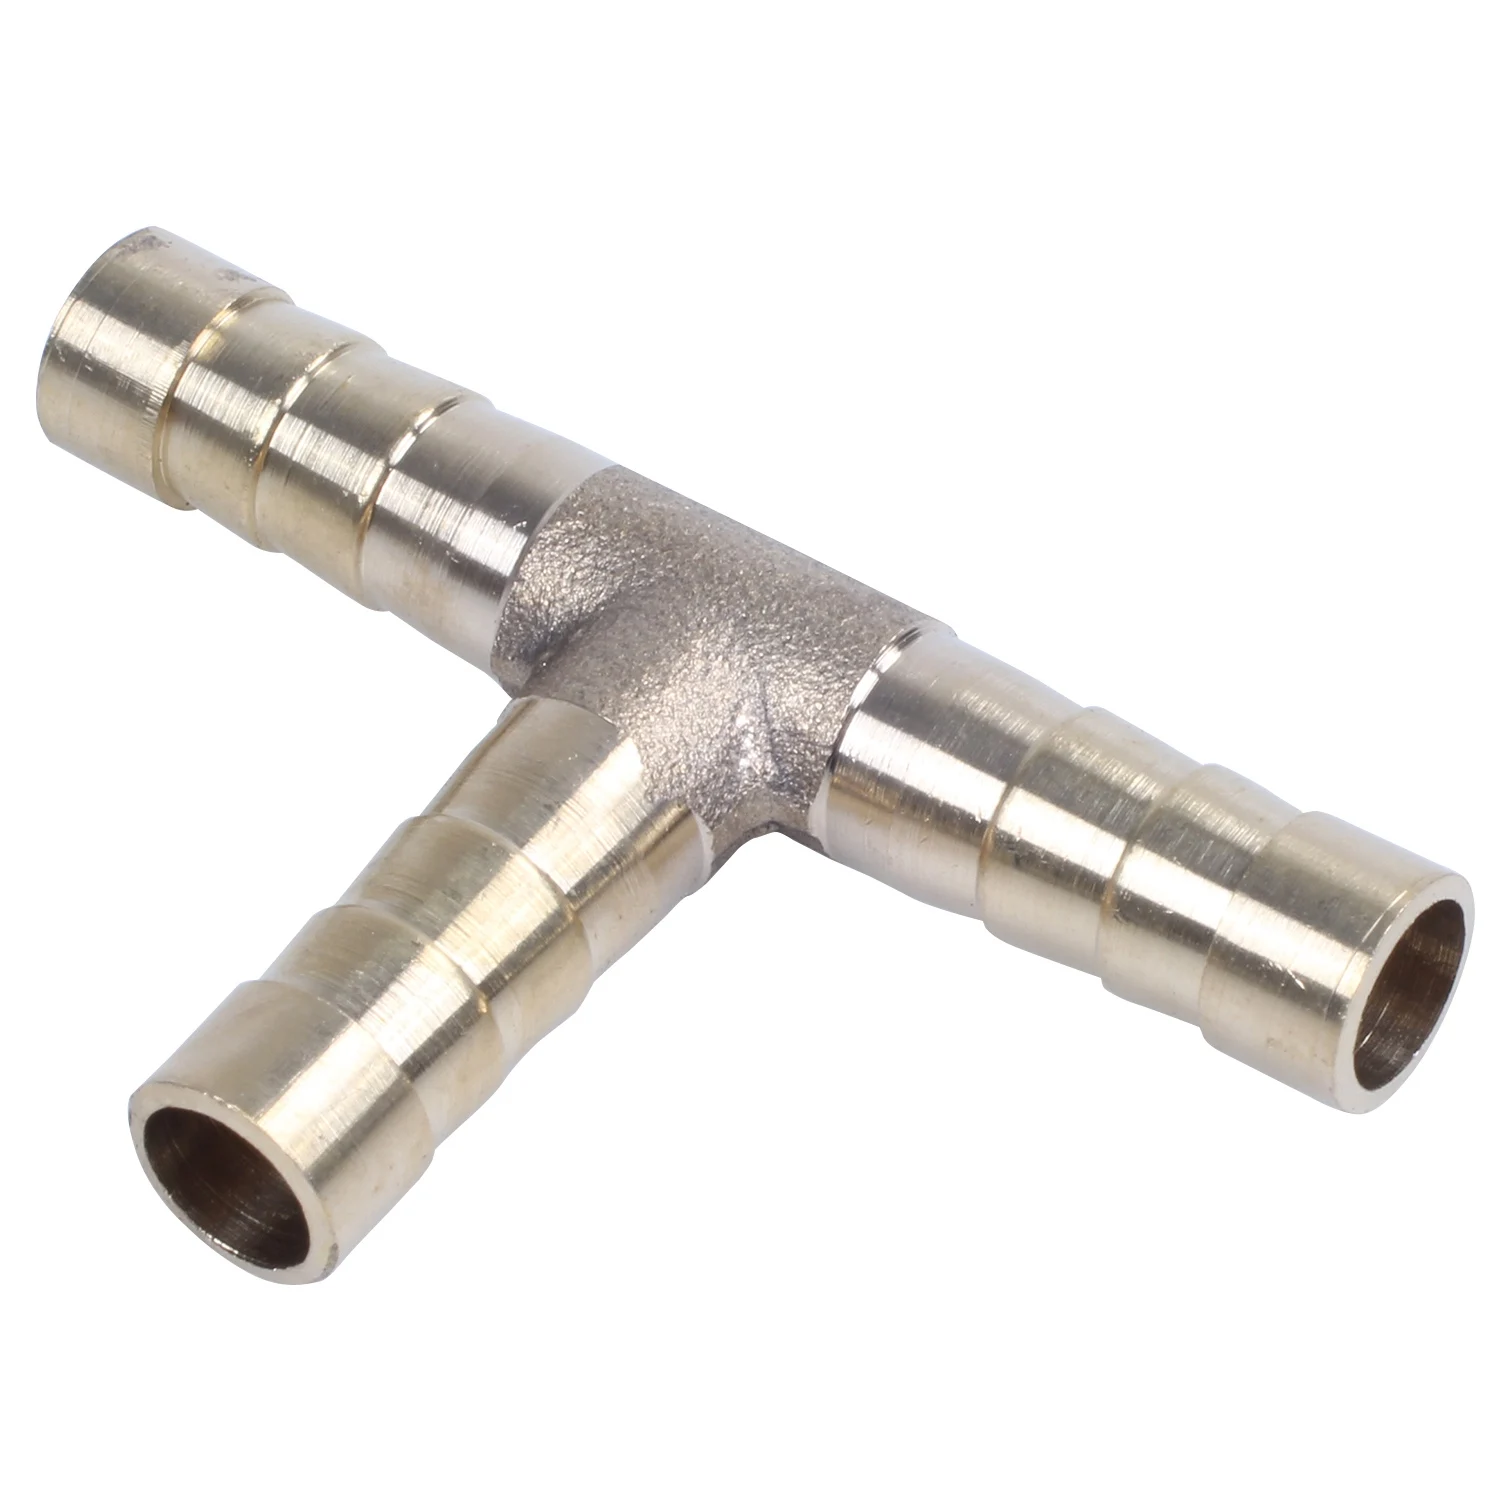 

8mm T Shape Air Gas Fuel Water Gasoline Hose Joiner Pipe Connector